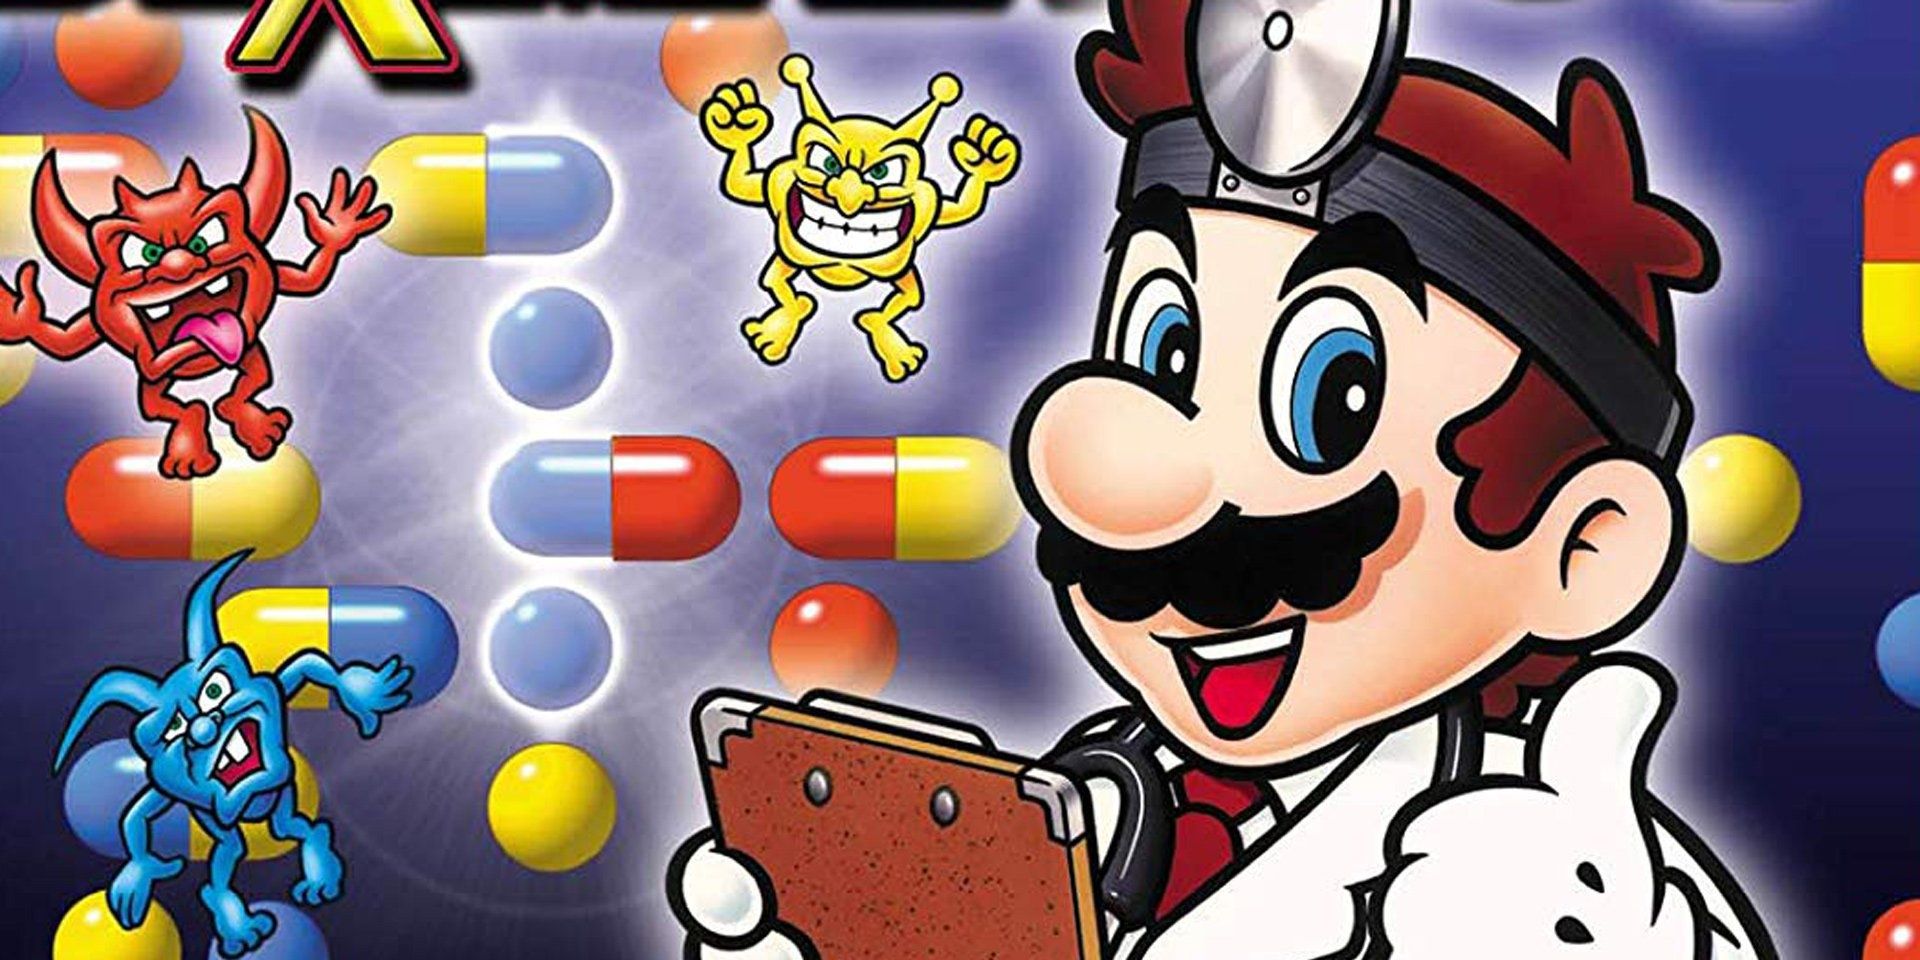 Cover art of Dr. Mario and the three types of viruses